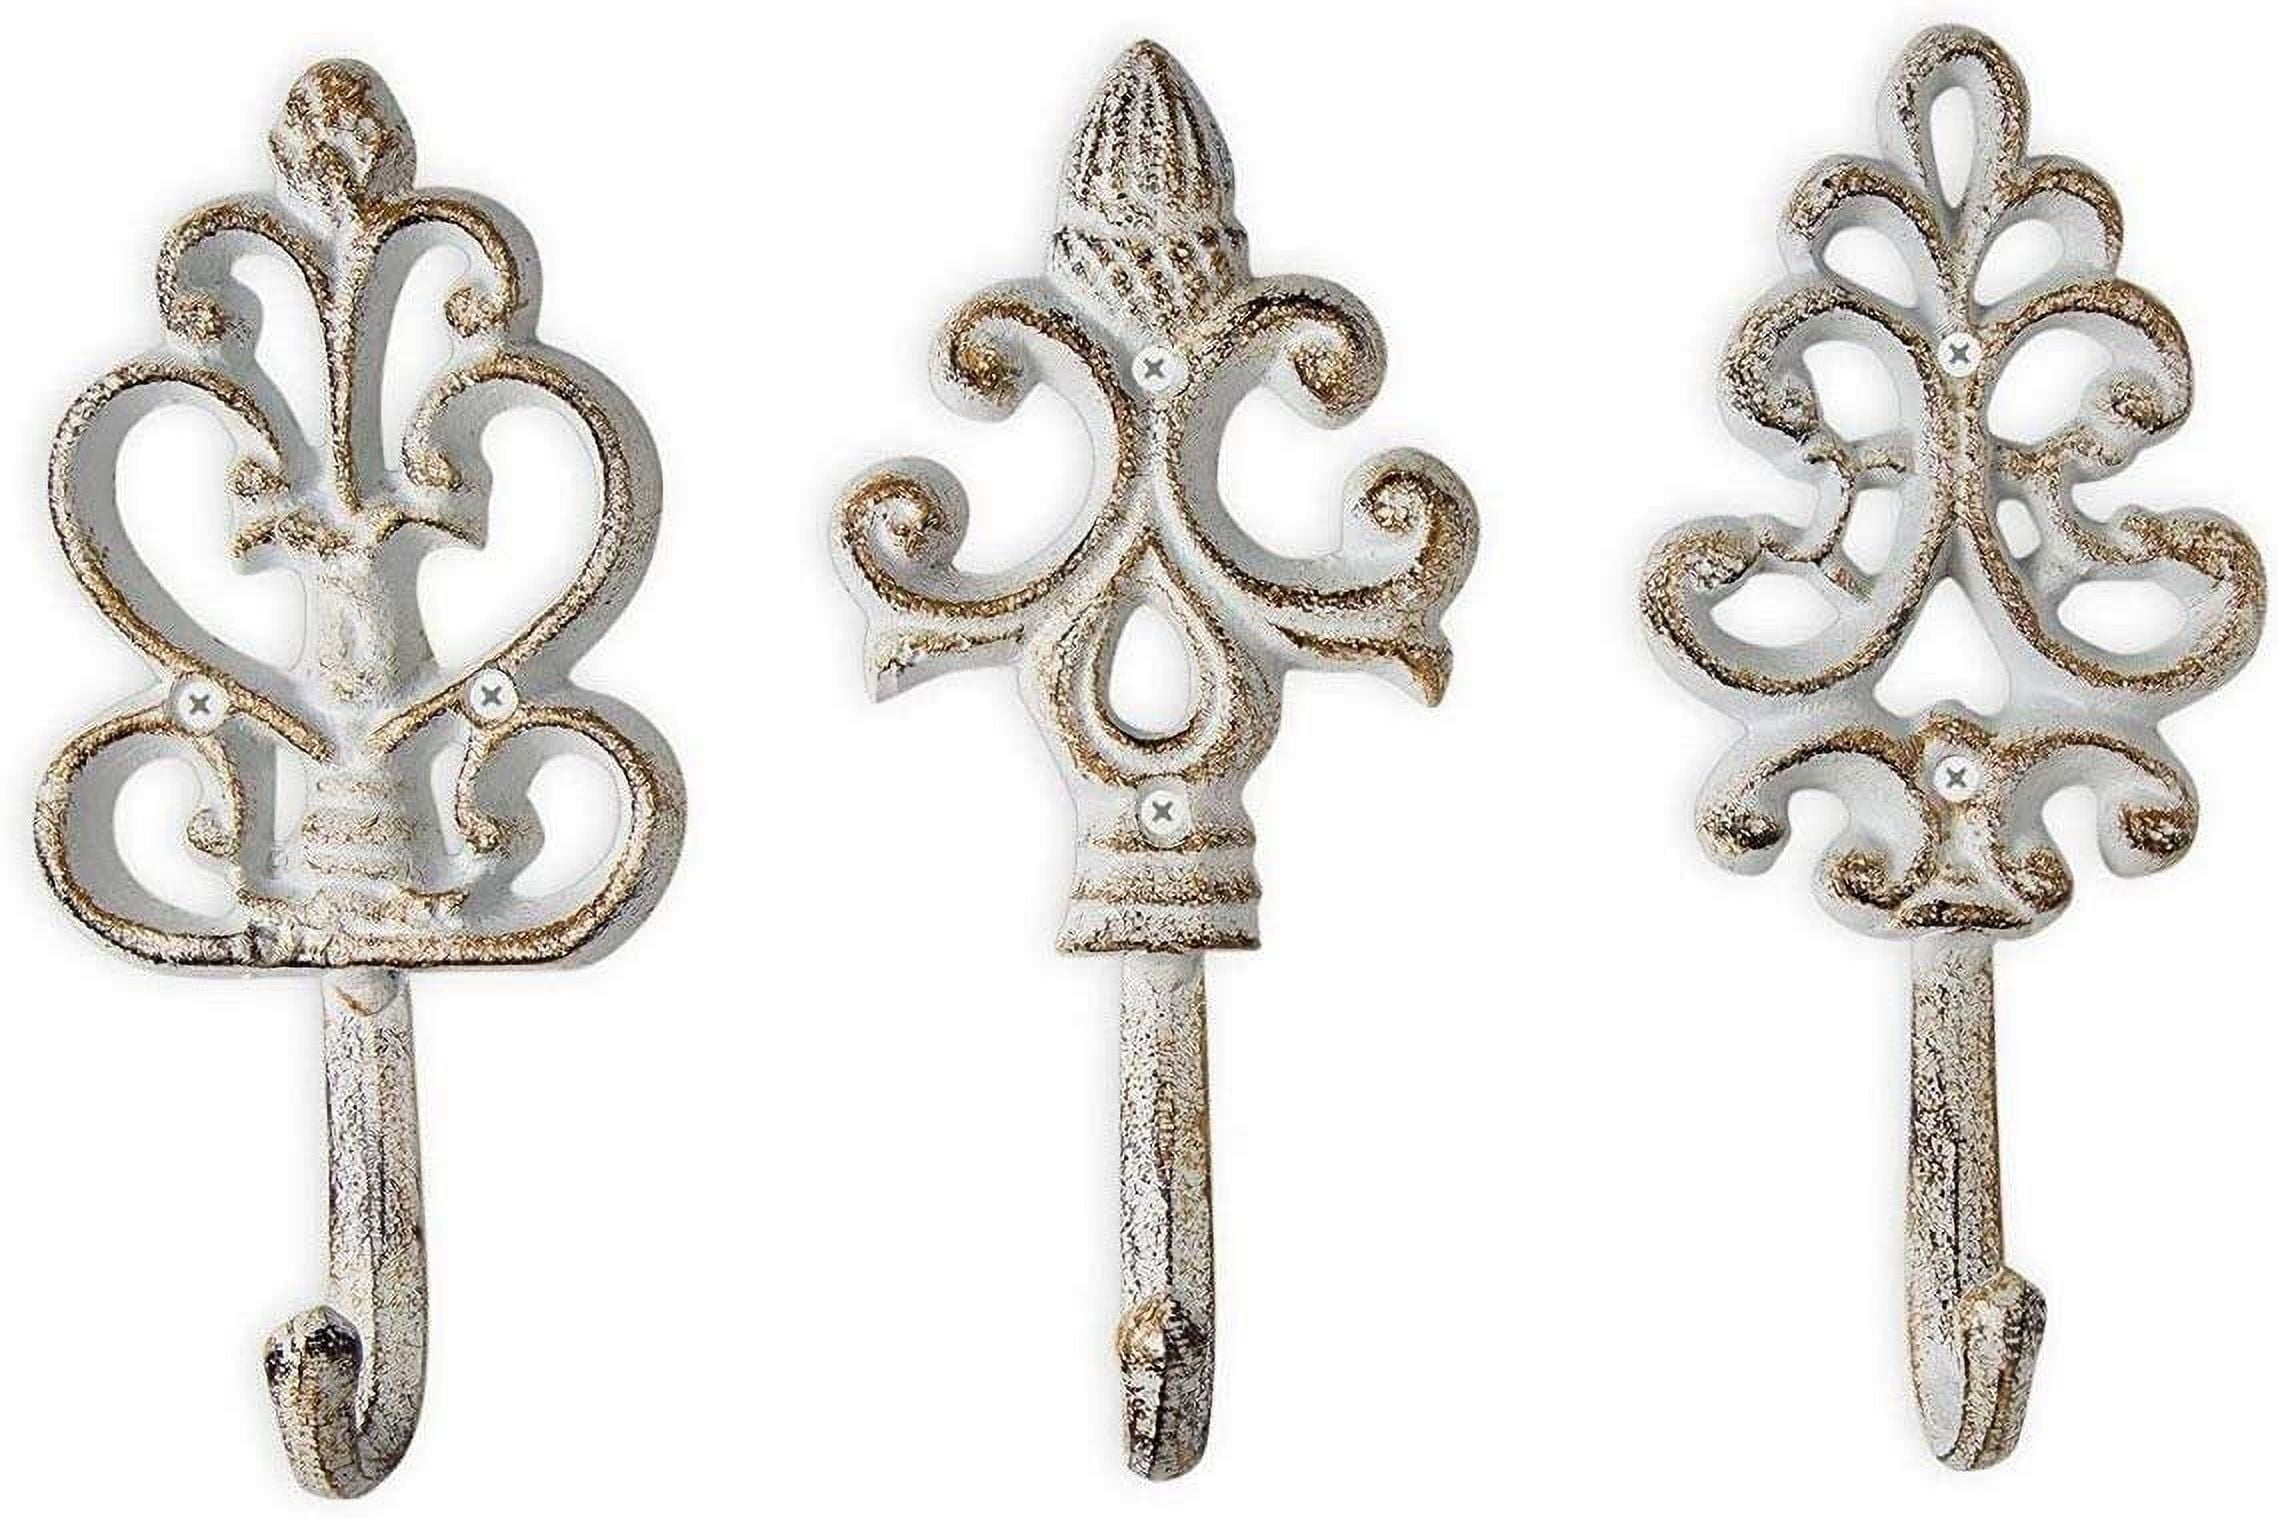 Shabby Chic Cast Iron Decorative Wall Hooks - Rustic - Antique - French  Country Charm - Large Decorative Hanging Hooks - Set of 3 - Screws and  Anchors for Mounting Included 